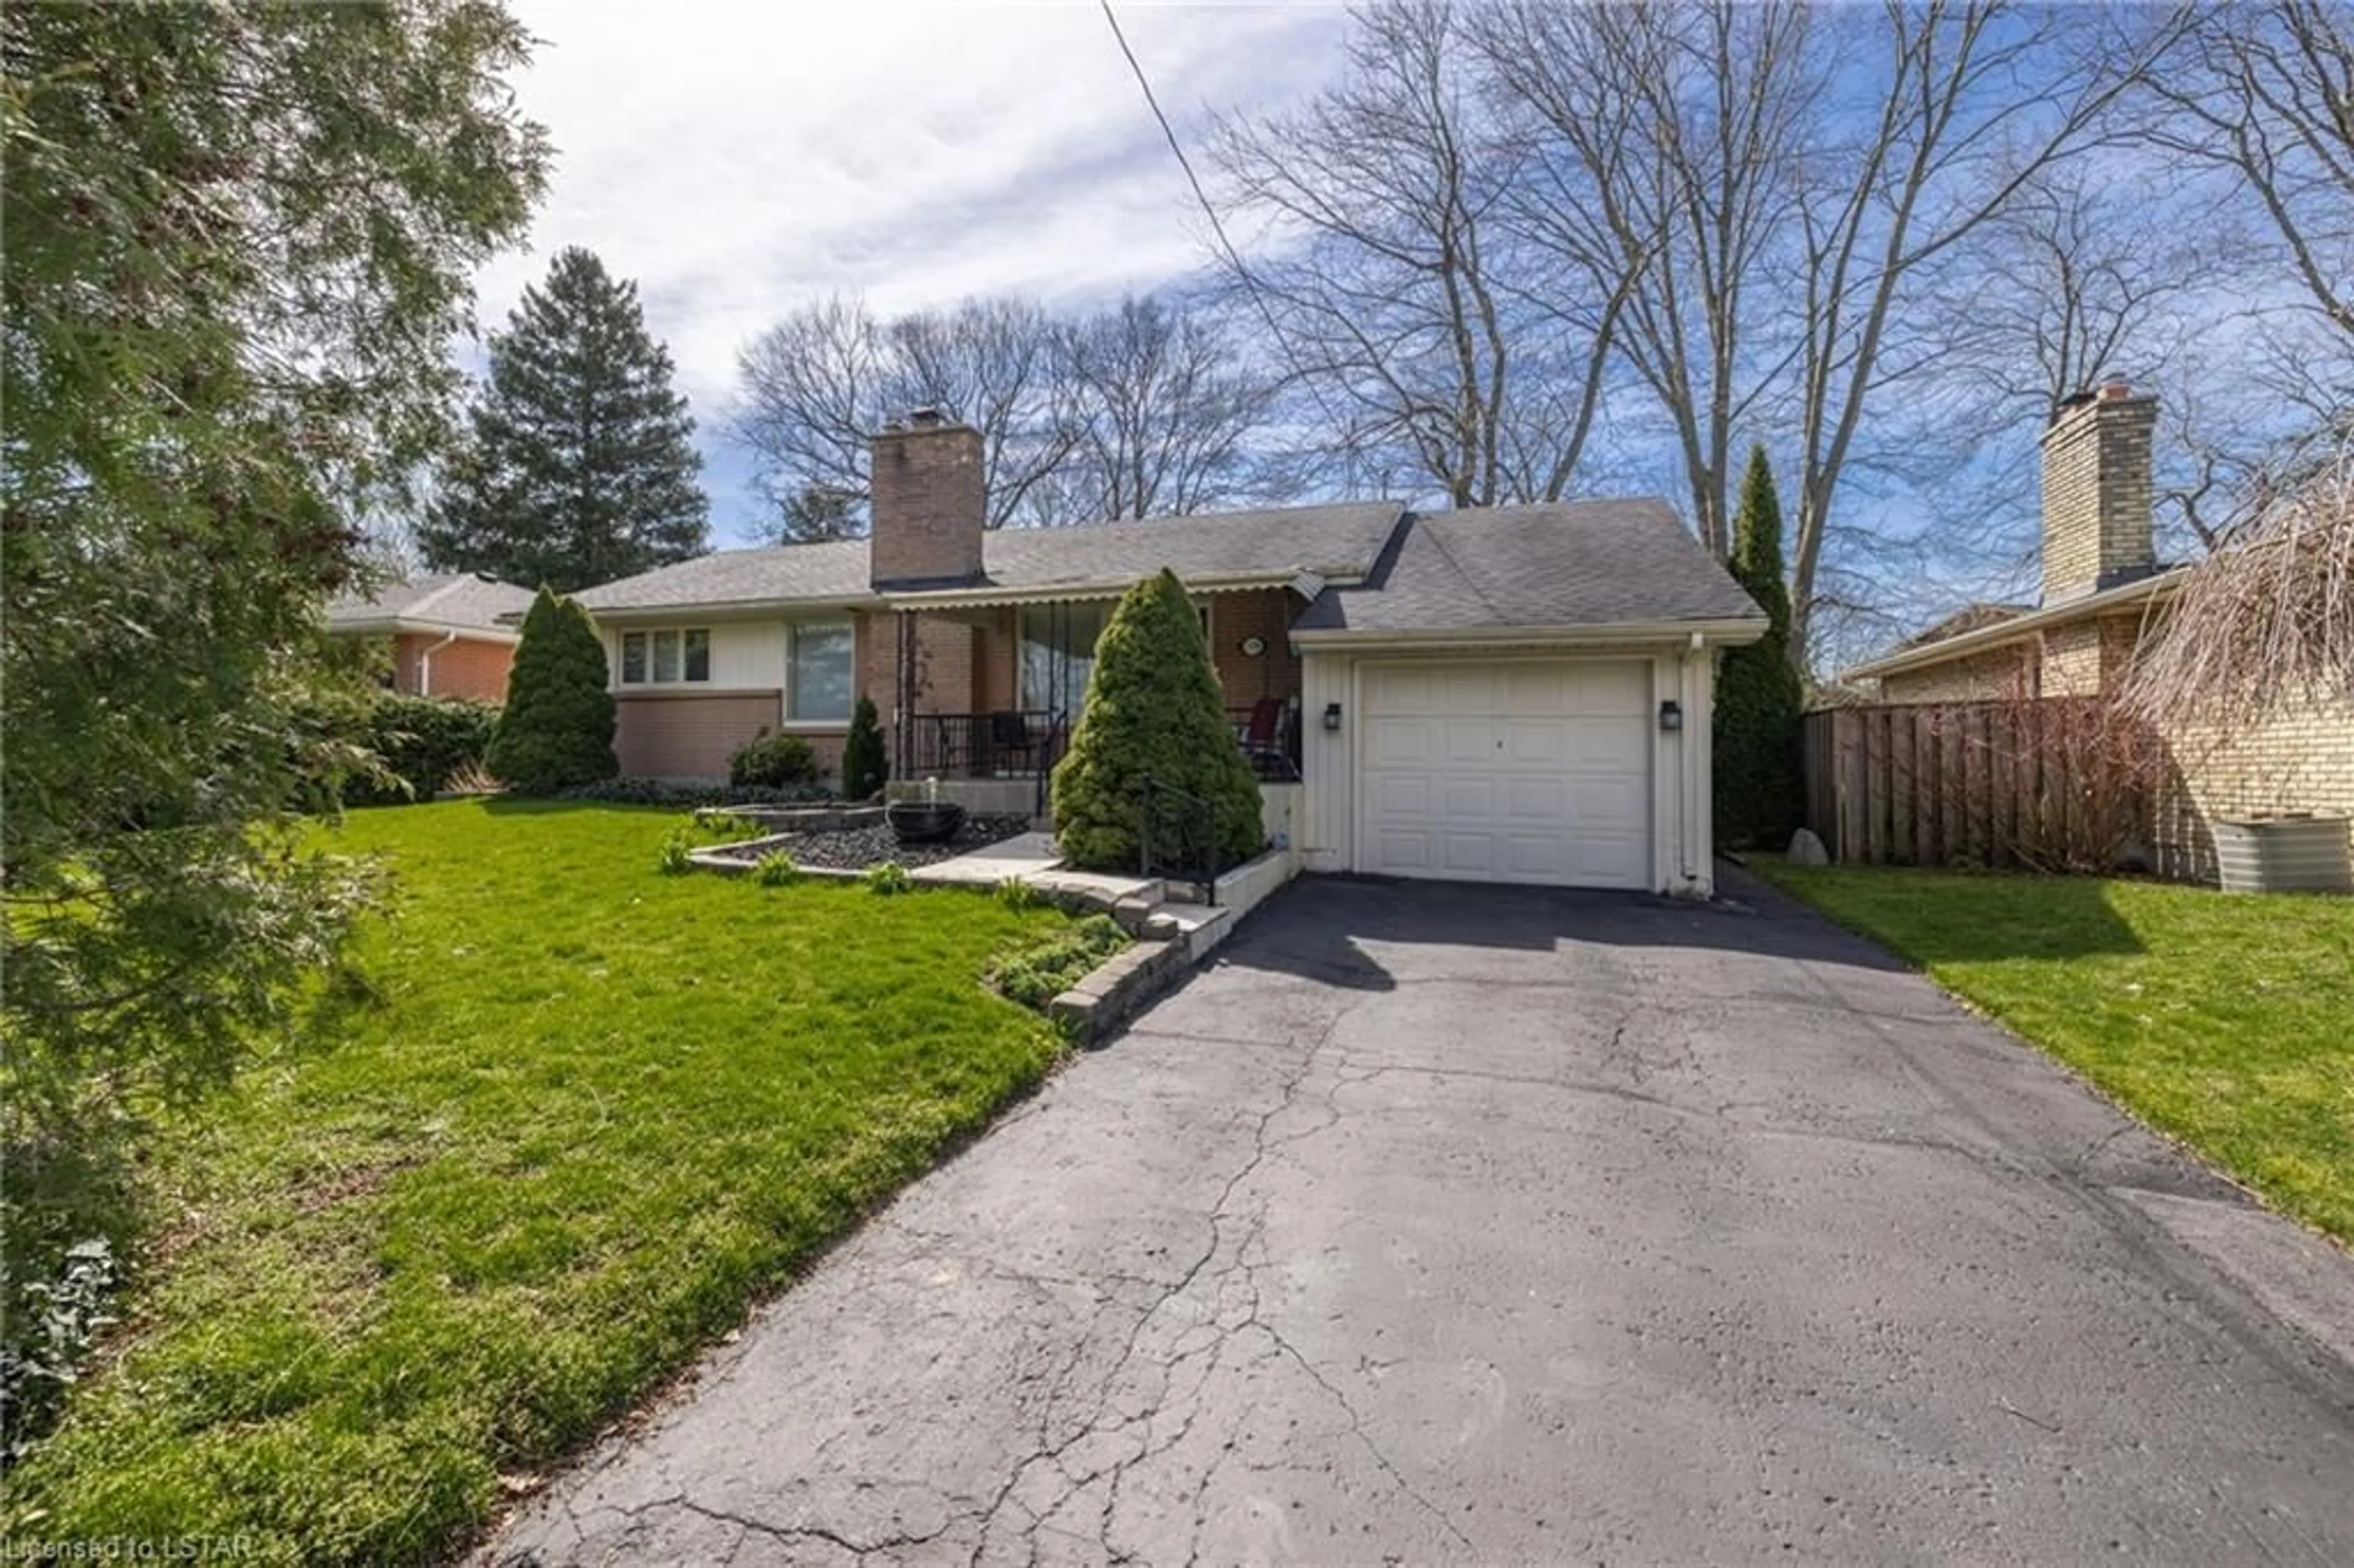 Frontside or backside of a home for 1378 Collingwood Ave, London Ontario N6K 2H1